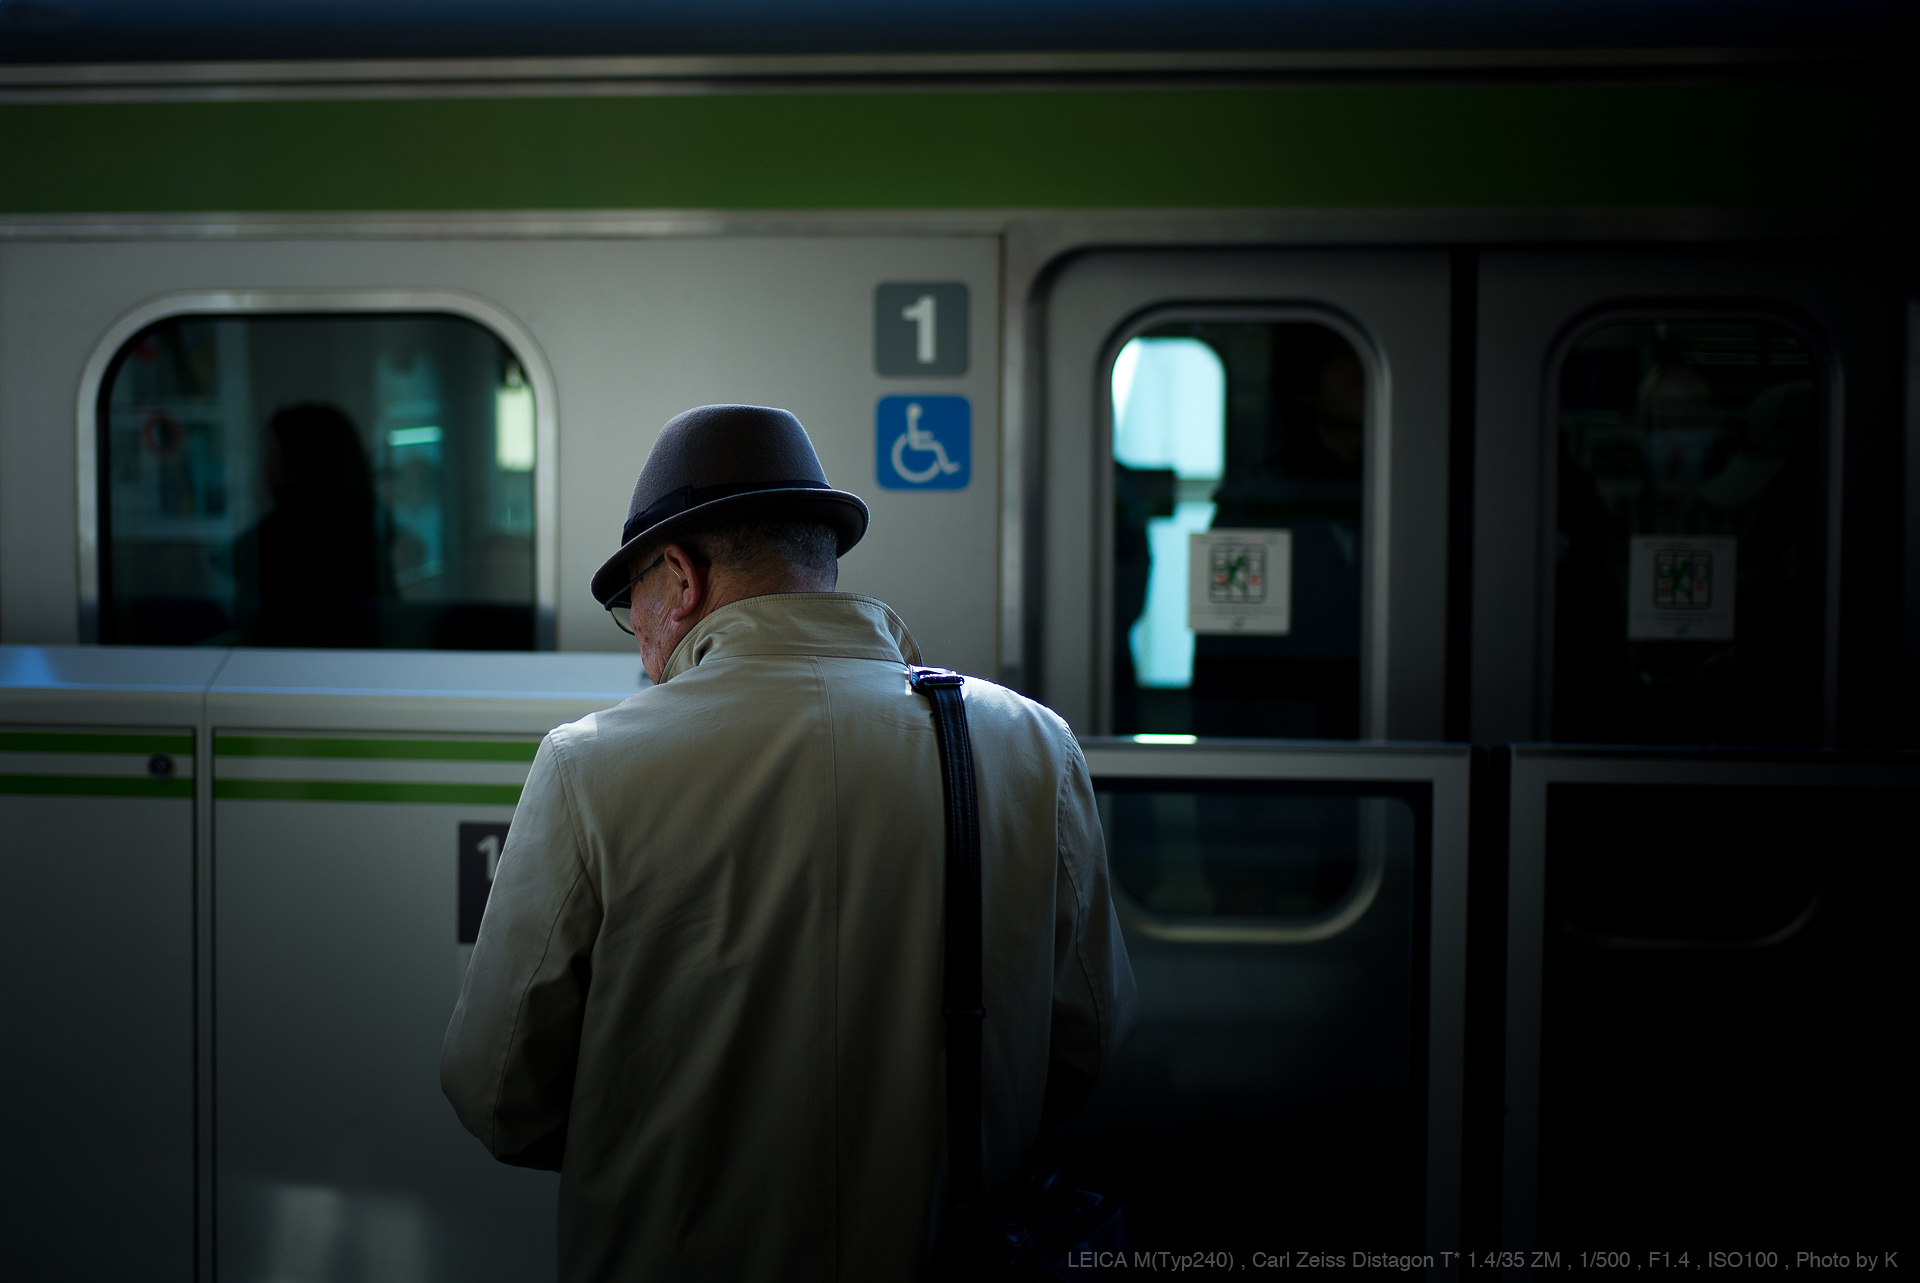 LEICA M (Typ240), Carl Zeiss Distagon T* 1.4/35 ZM, 1/500, F1.4, ISO 100, Photo by K